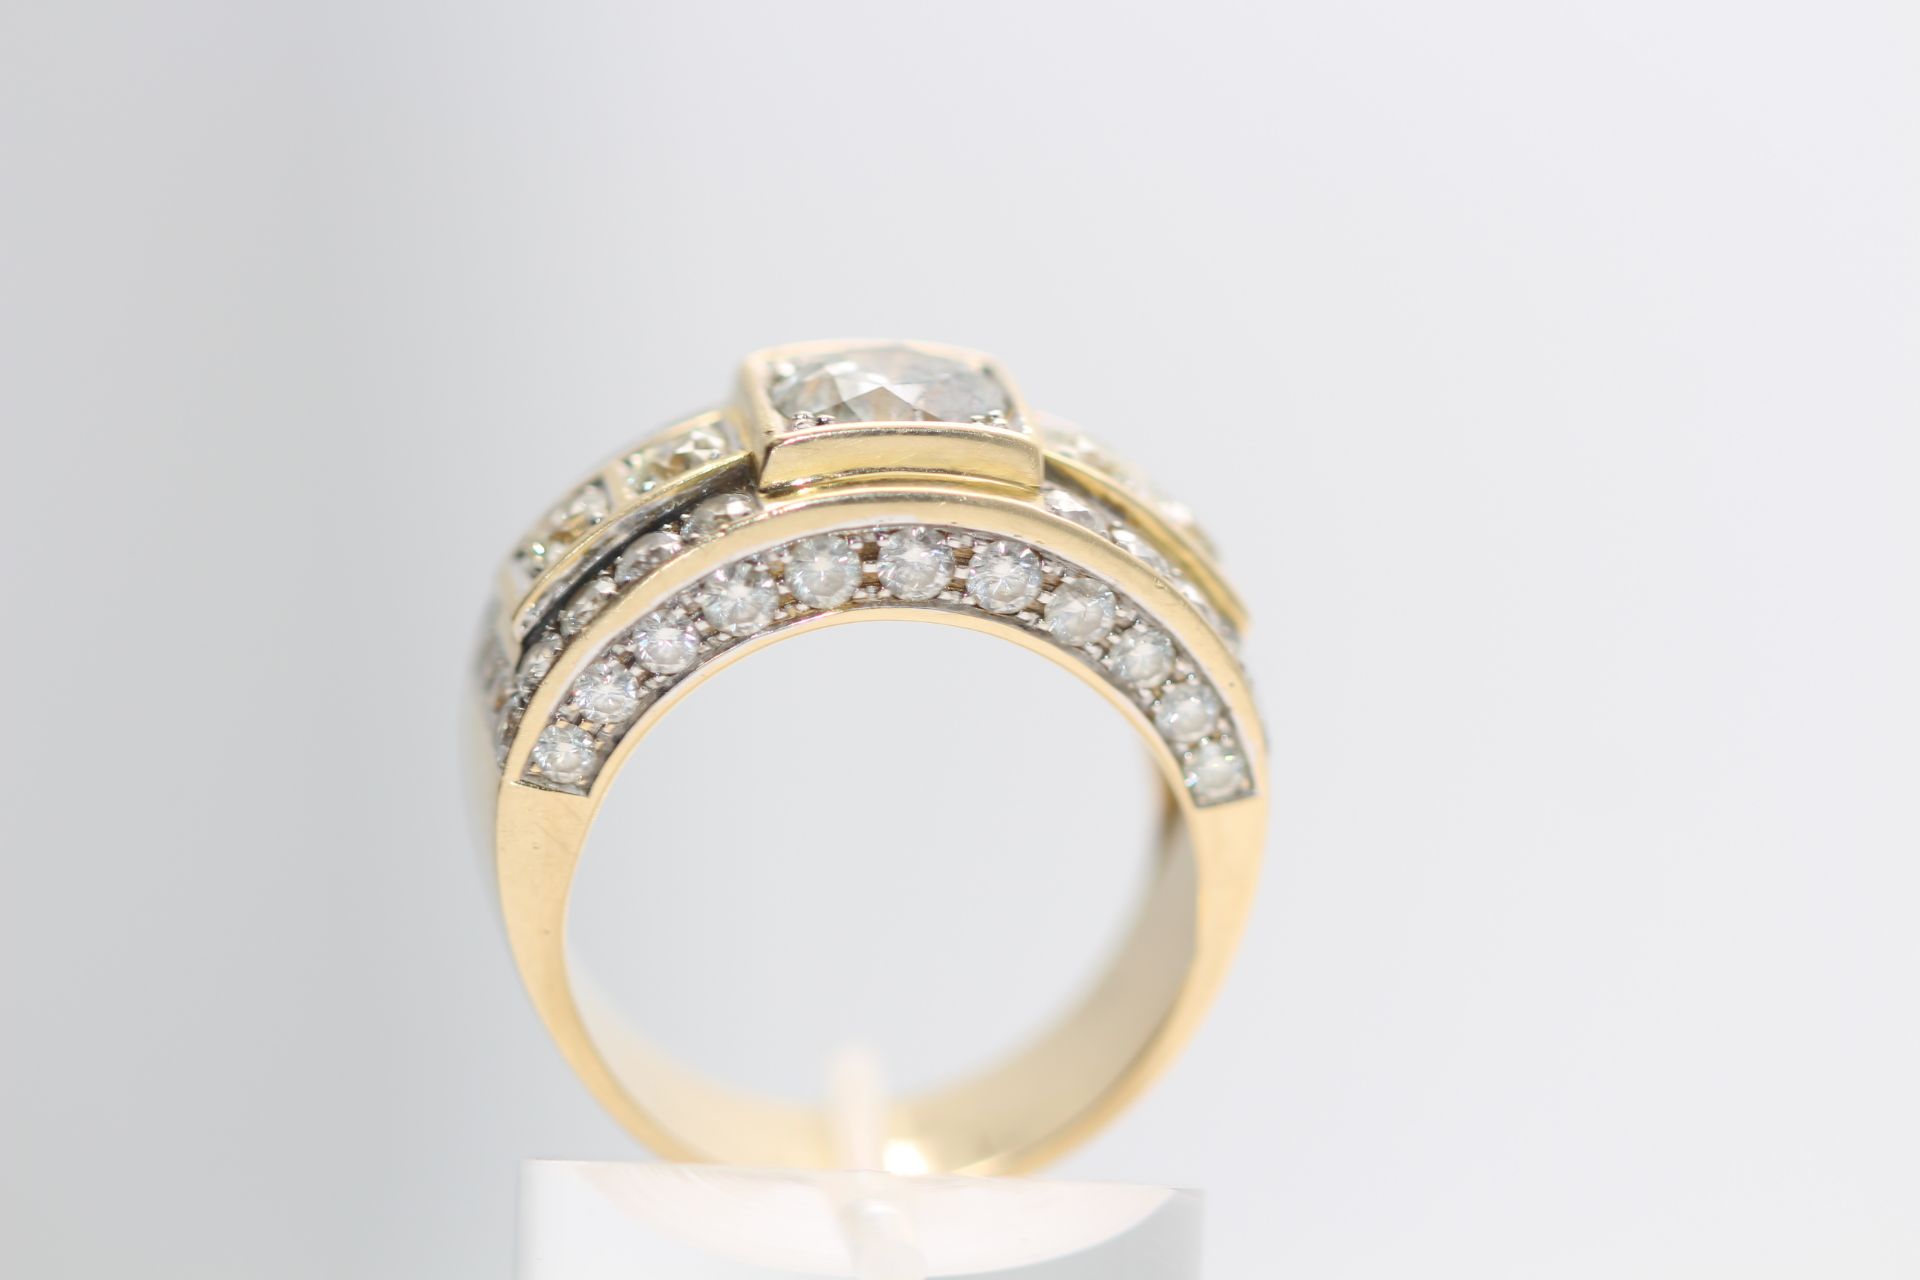 14ct Yelow Gold Gents Diamond ring, Set with a total of 6.81 carats of Brilliant cut dimaond - Image 4 of 5